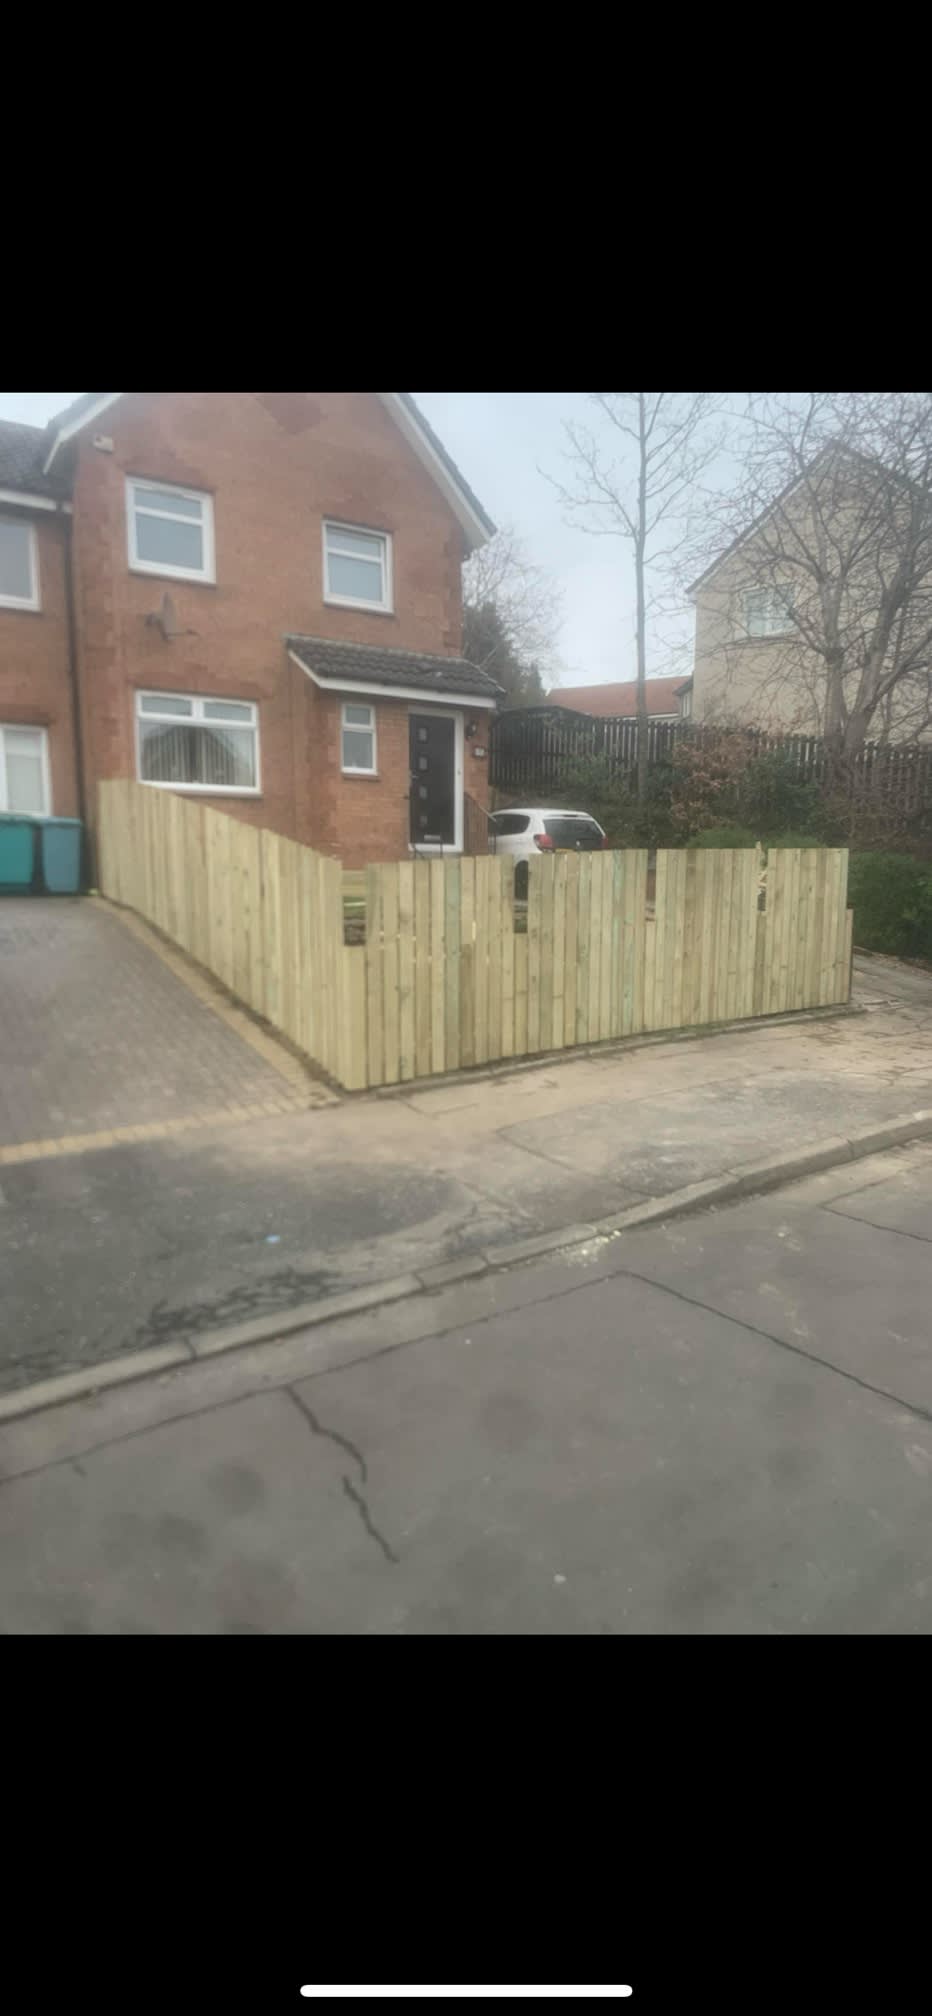 Images SJB Fencing & Landscaping